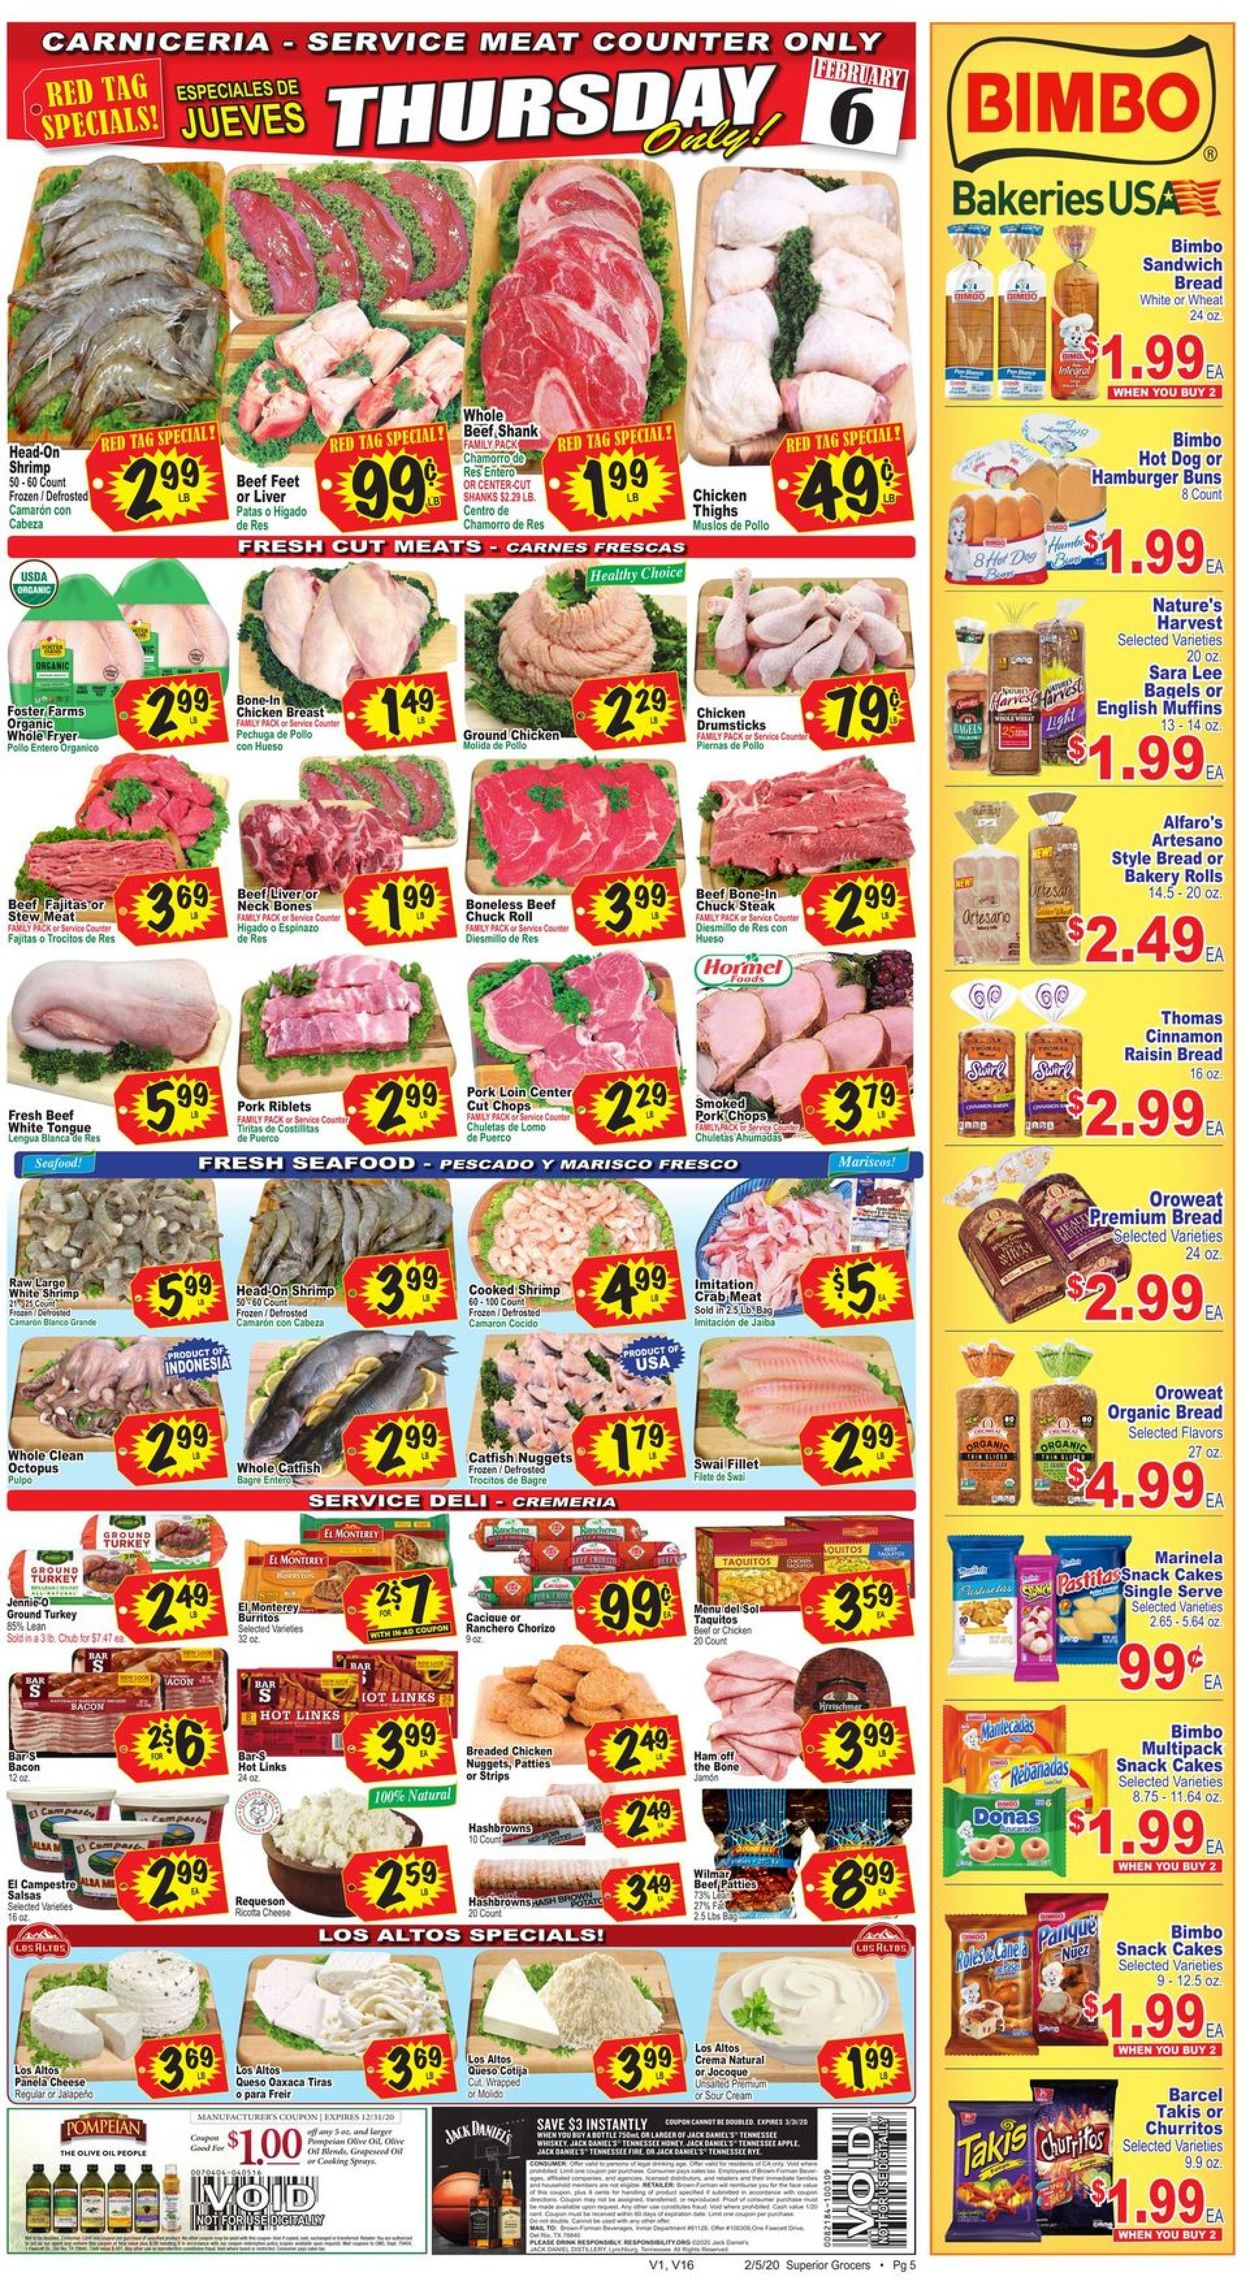 Catalogue Superior Grocers from 02/05/2020